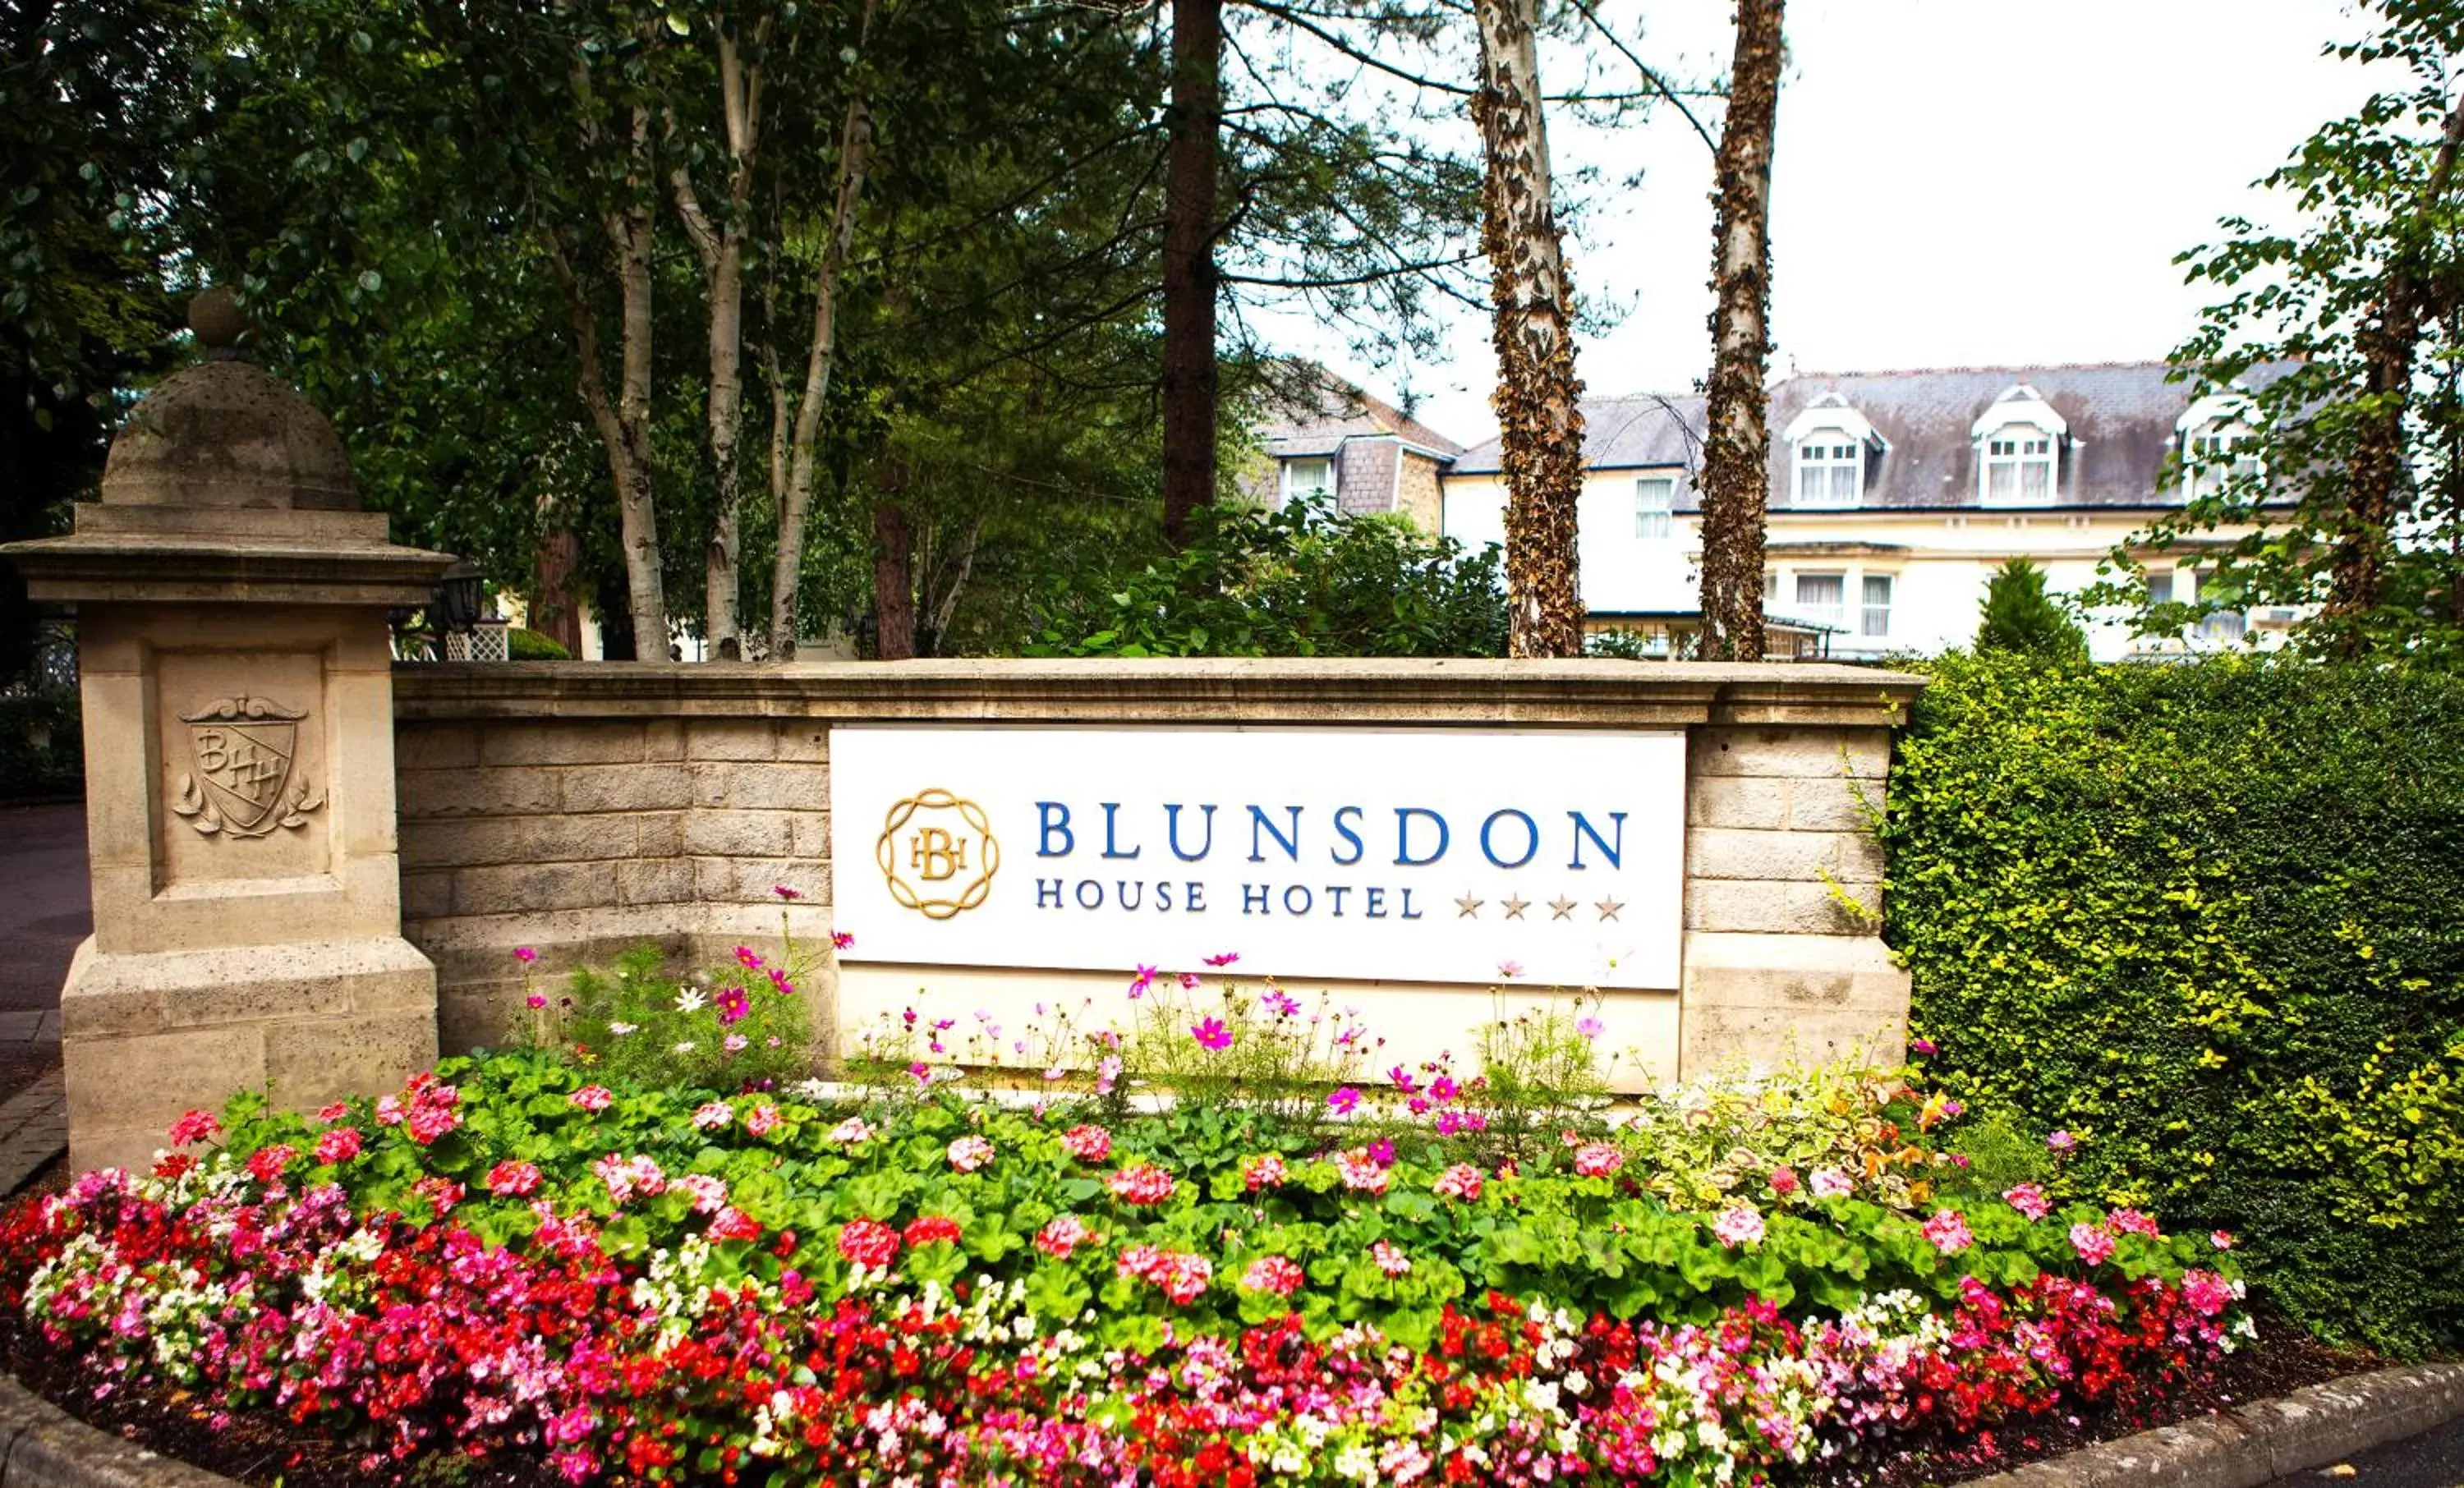 Property logo or sign in Swindon Blunsdon House Hotel, BW Premier Collection